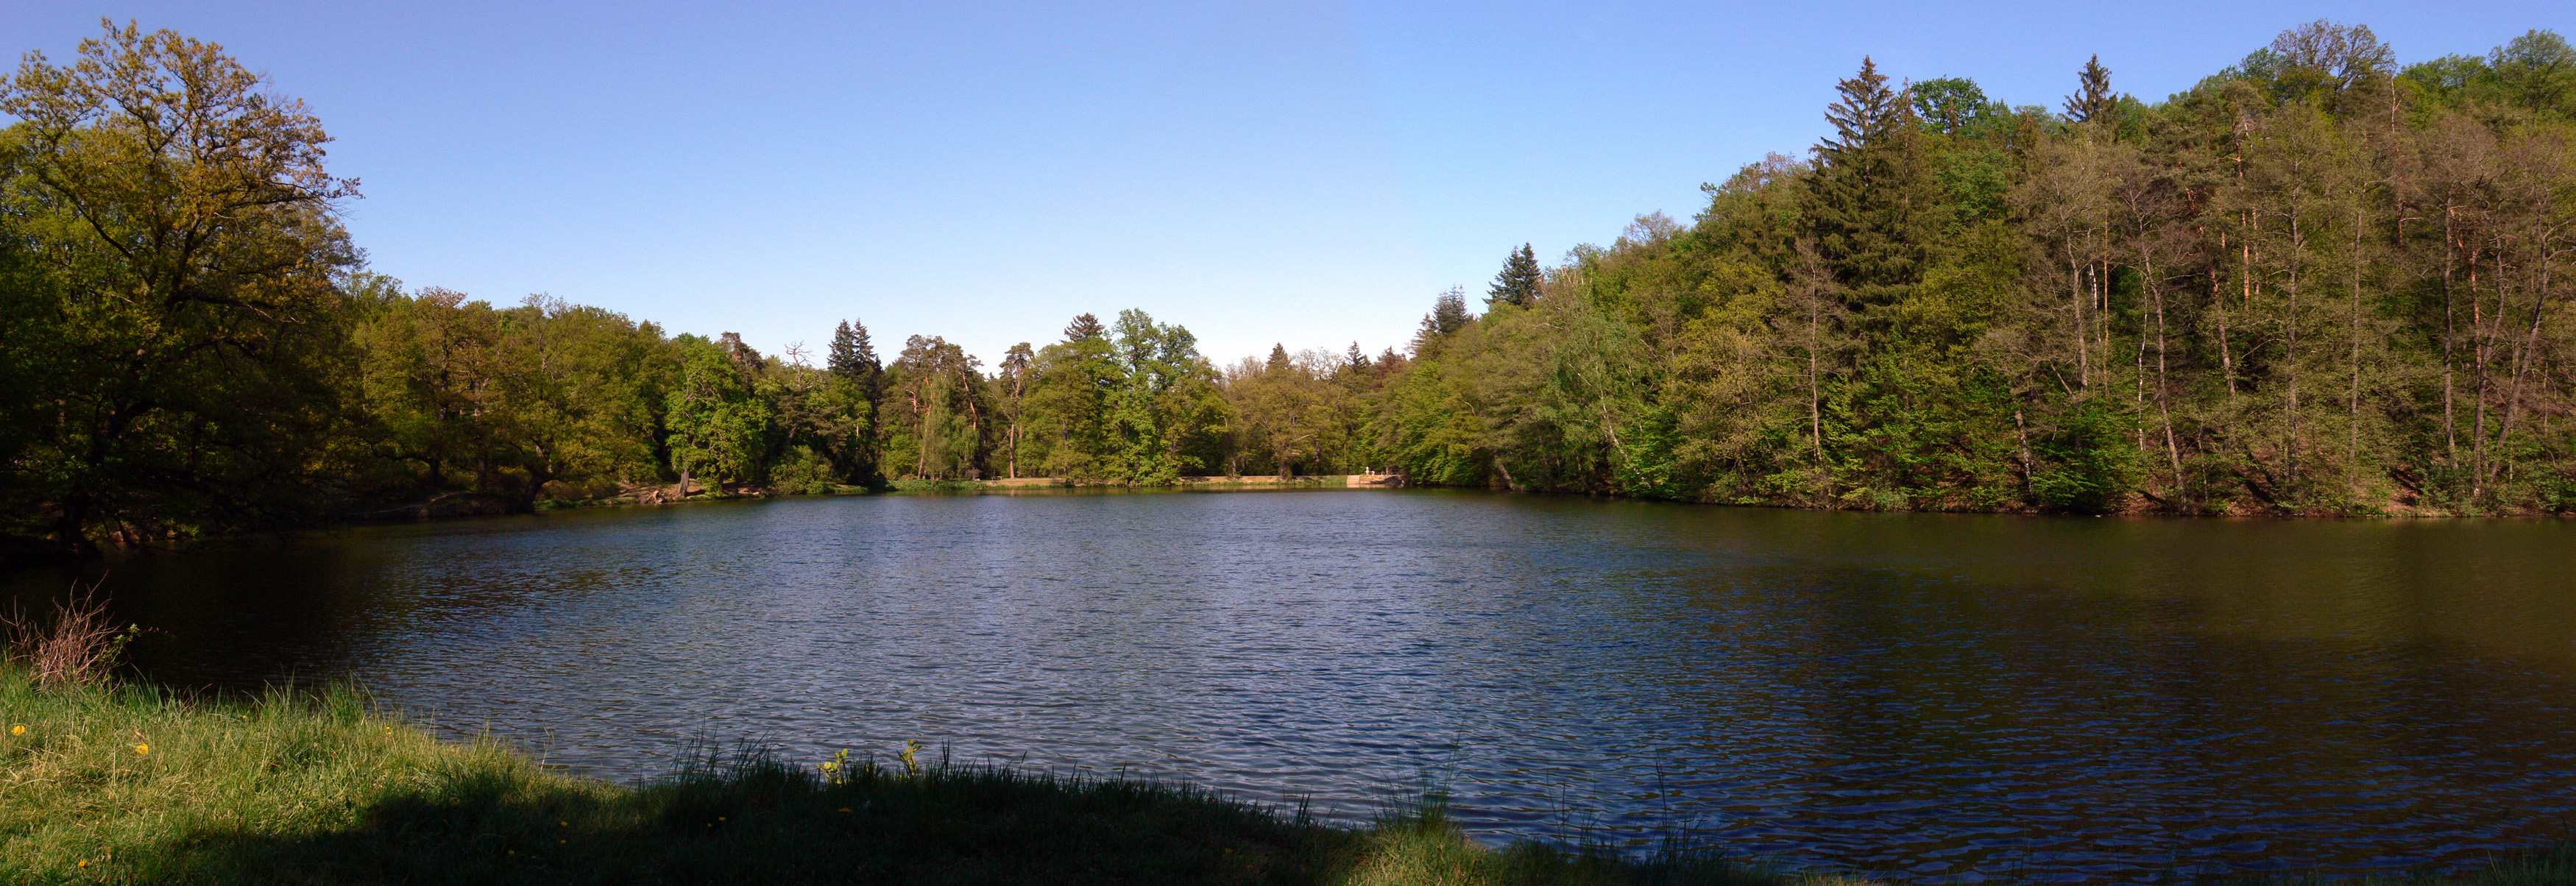 Lake in the park photo